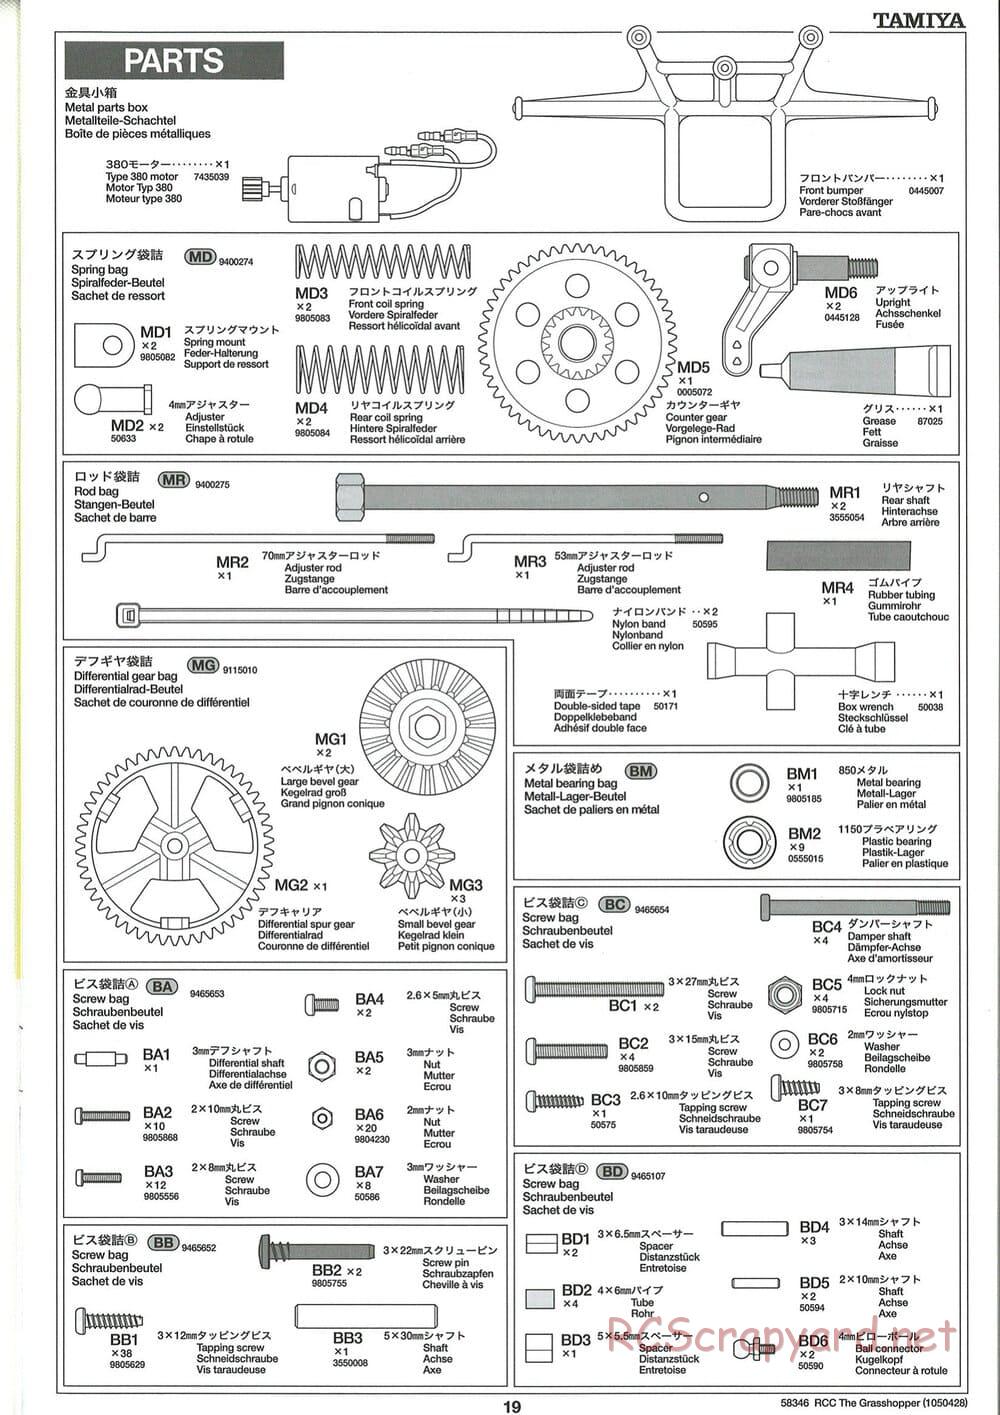 Tamiya - The Grasshopper (2005) - GH Chassis - Manual - Page 19